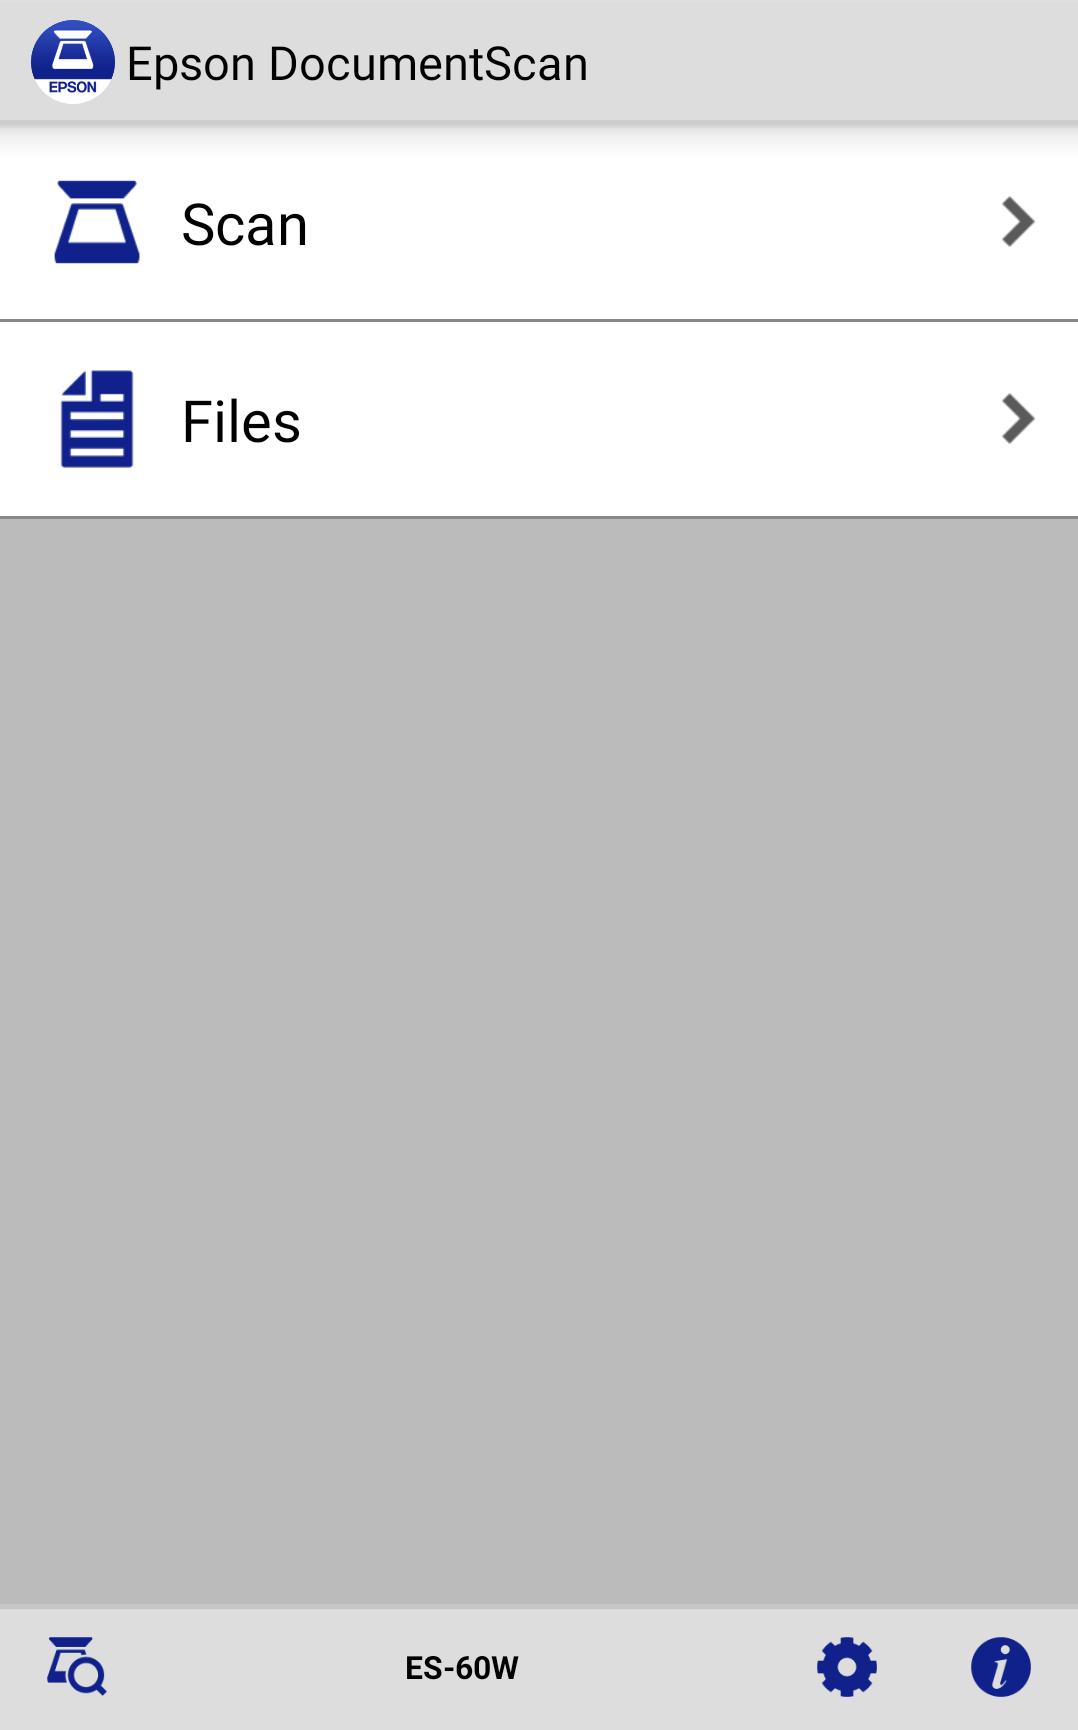 Epson DocumentScan for Android - APK Download